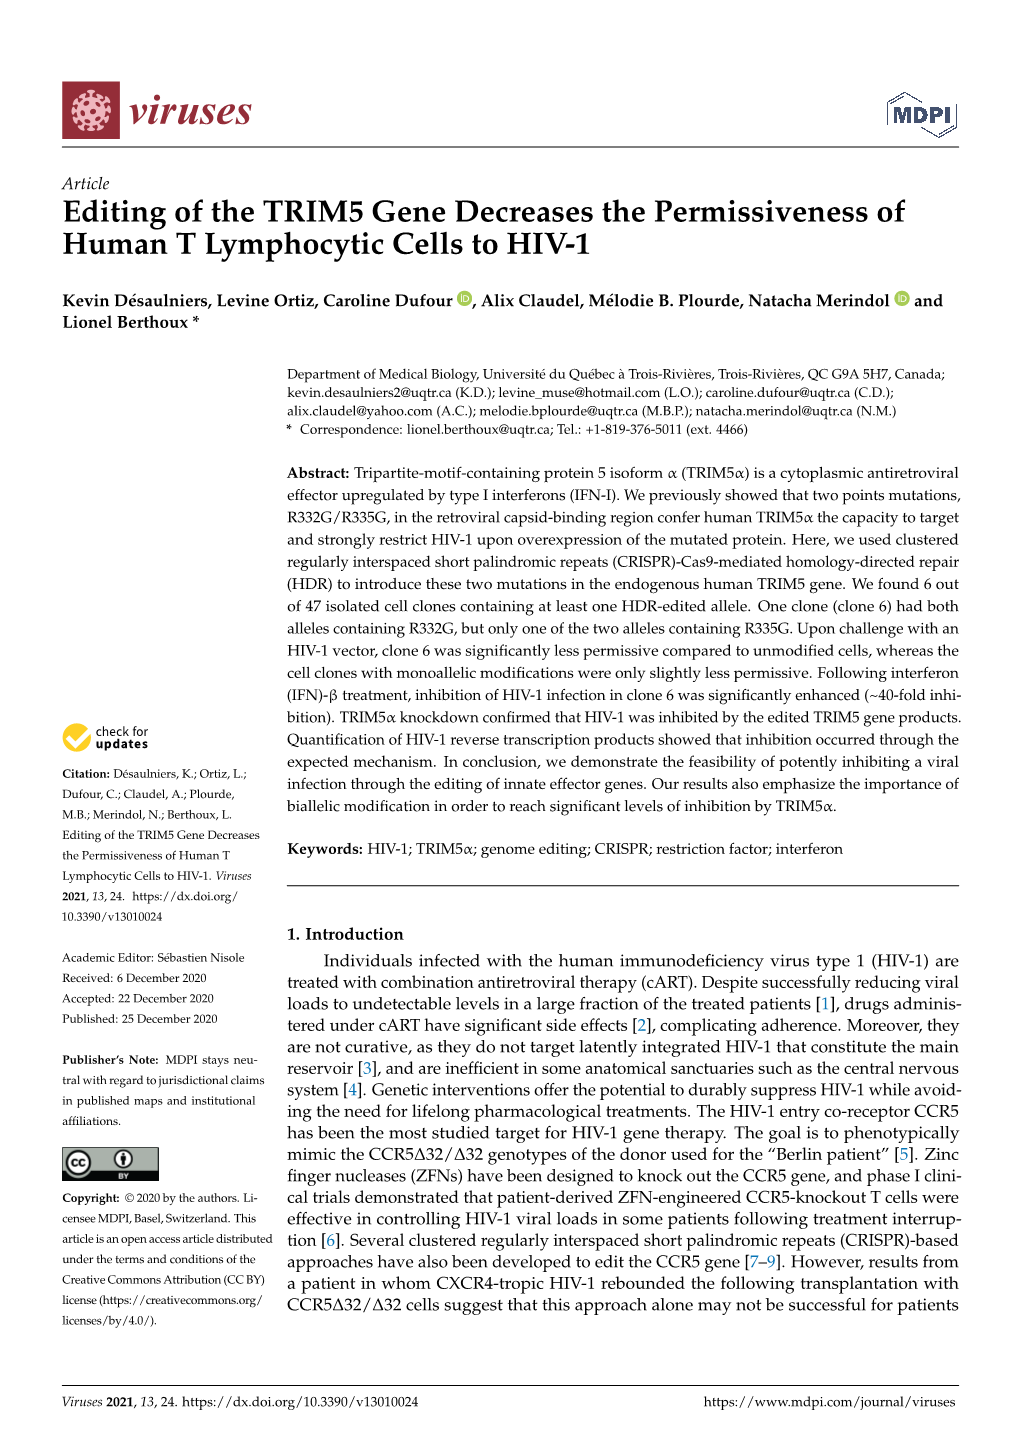 Editing of the TRIM5 Gene Decreases the Permissiveness of Human T Lymphocytic Cells to HIV-1